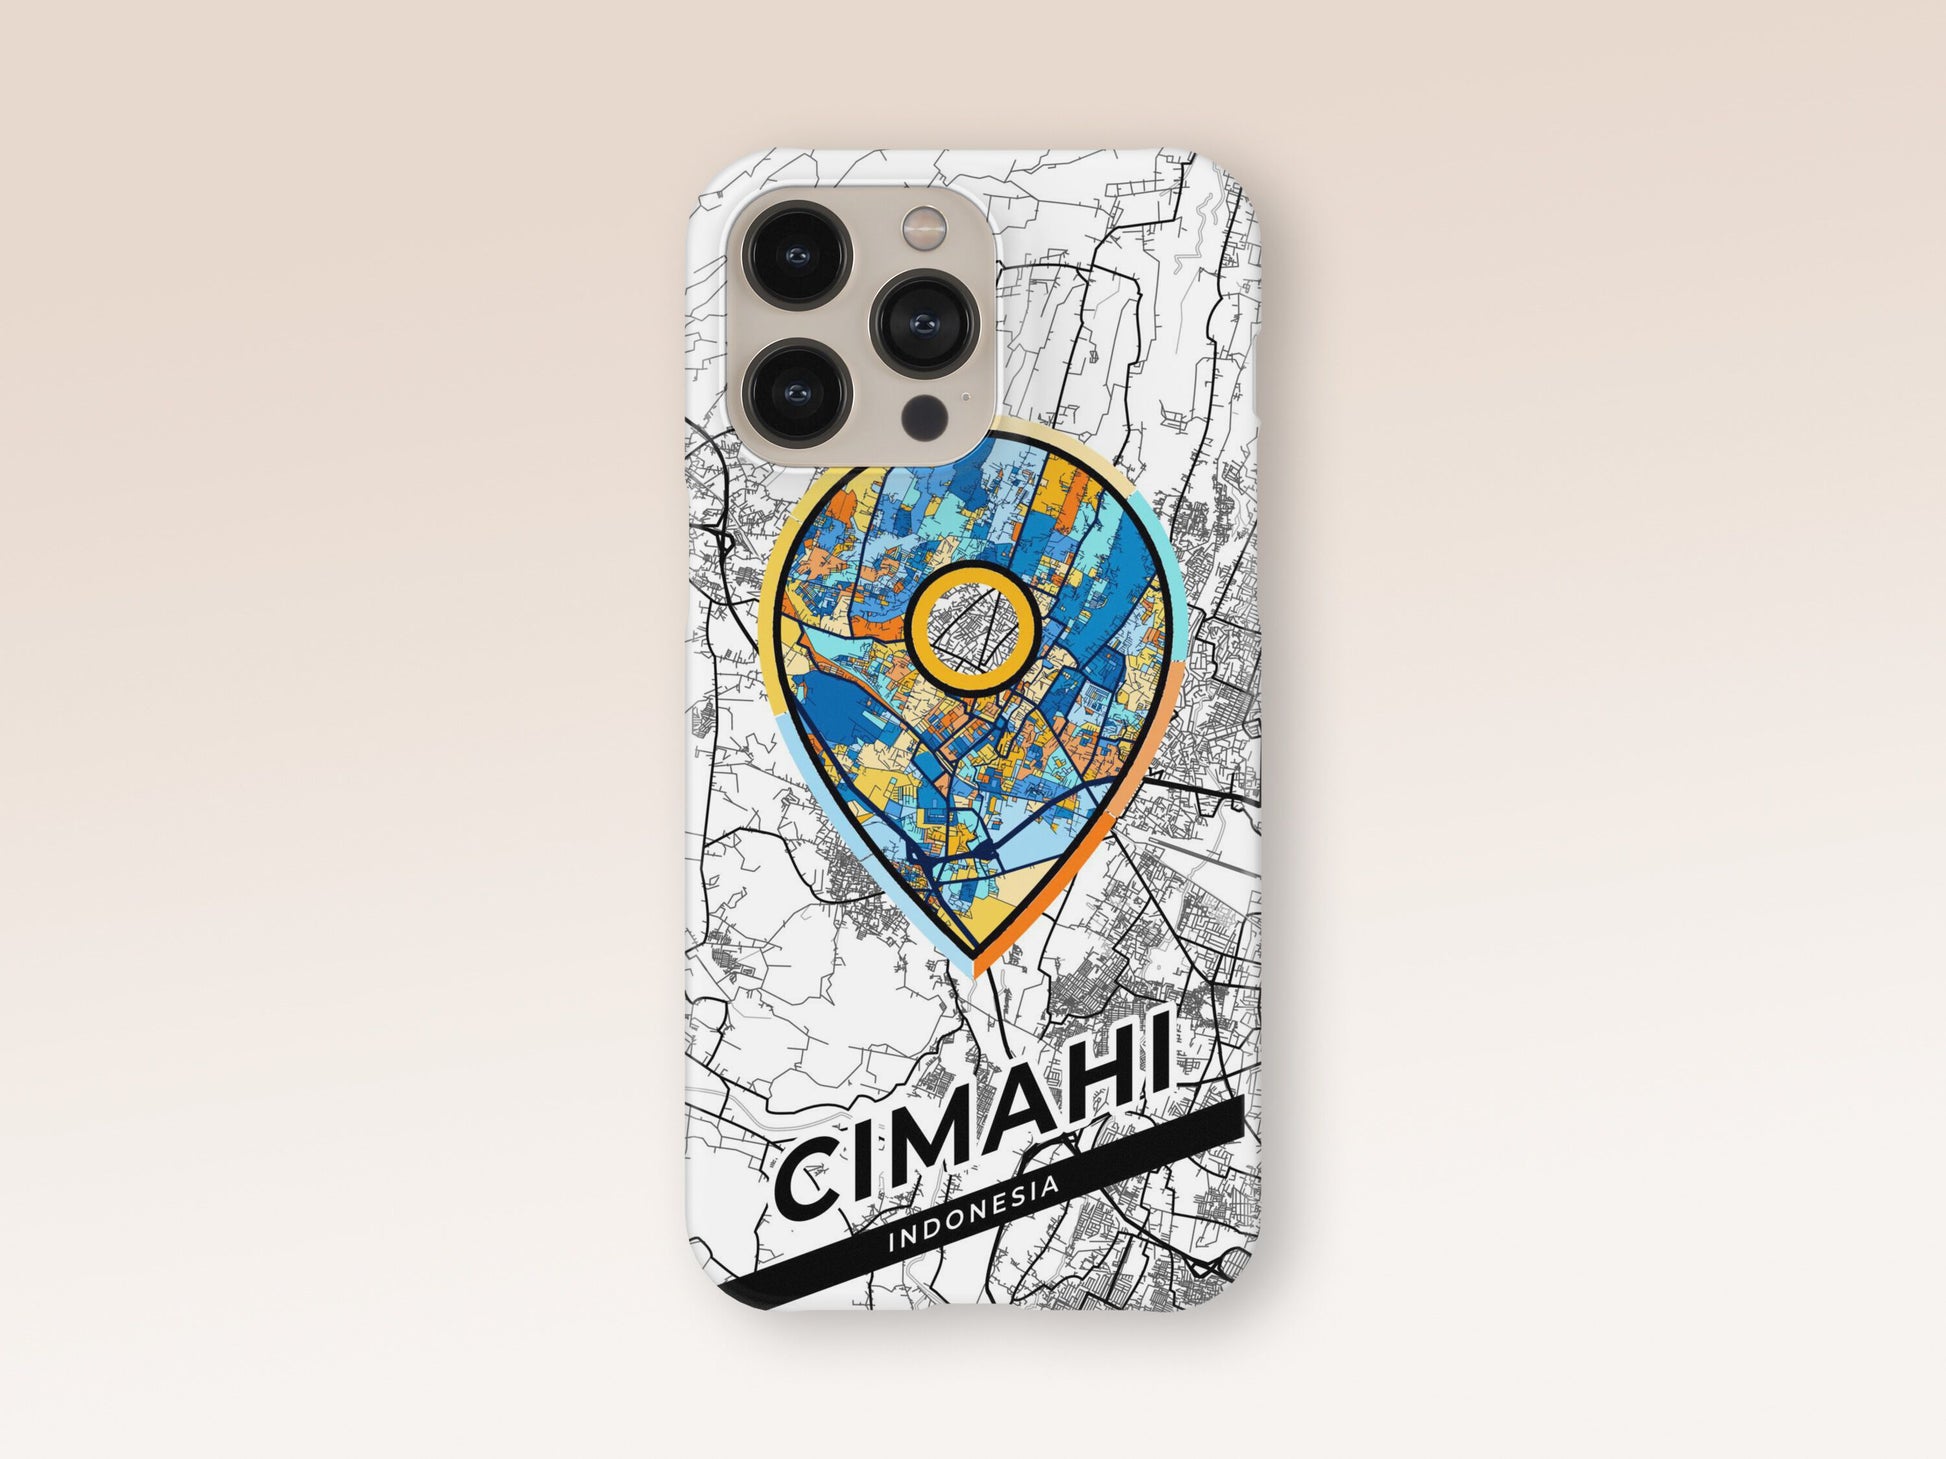 Cimahi Indonesia slim phone case with colorful icon. Birthday, wedding or housewarming gift. Couple match cases. 1